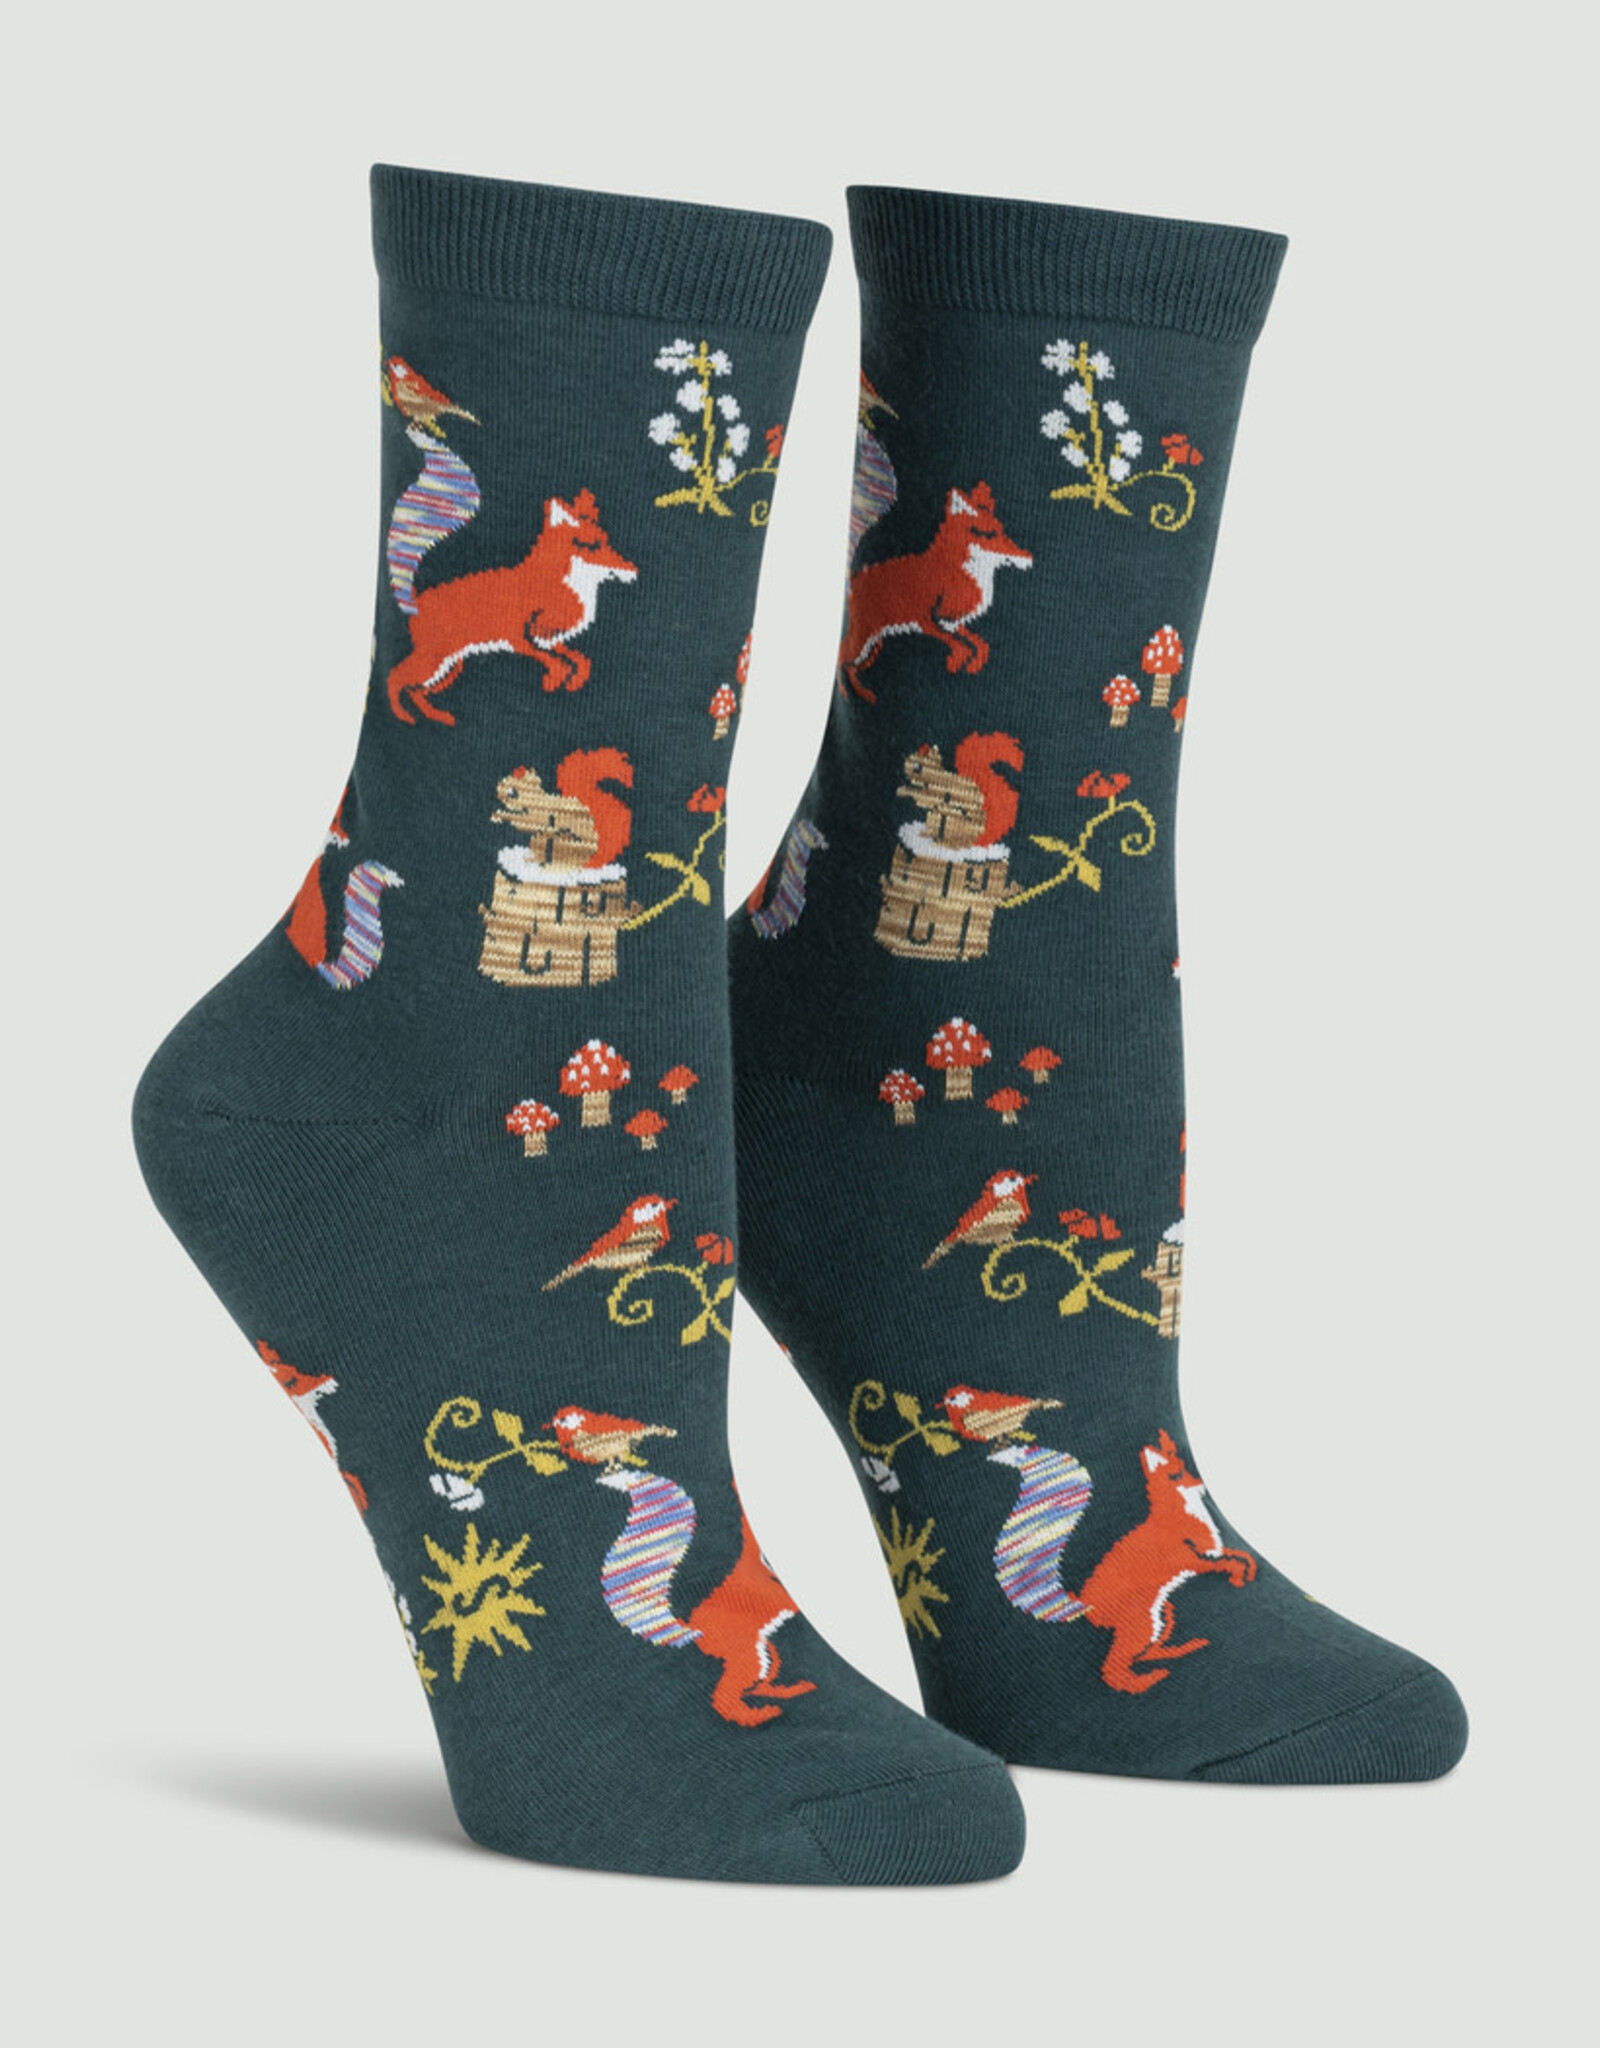 Sock It To Me Women's Crew- Foxy, I Think I Love You!